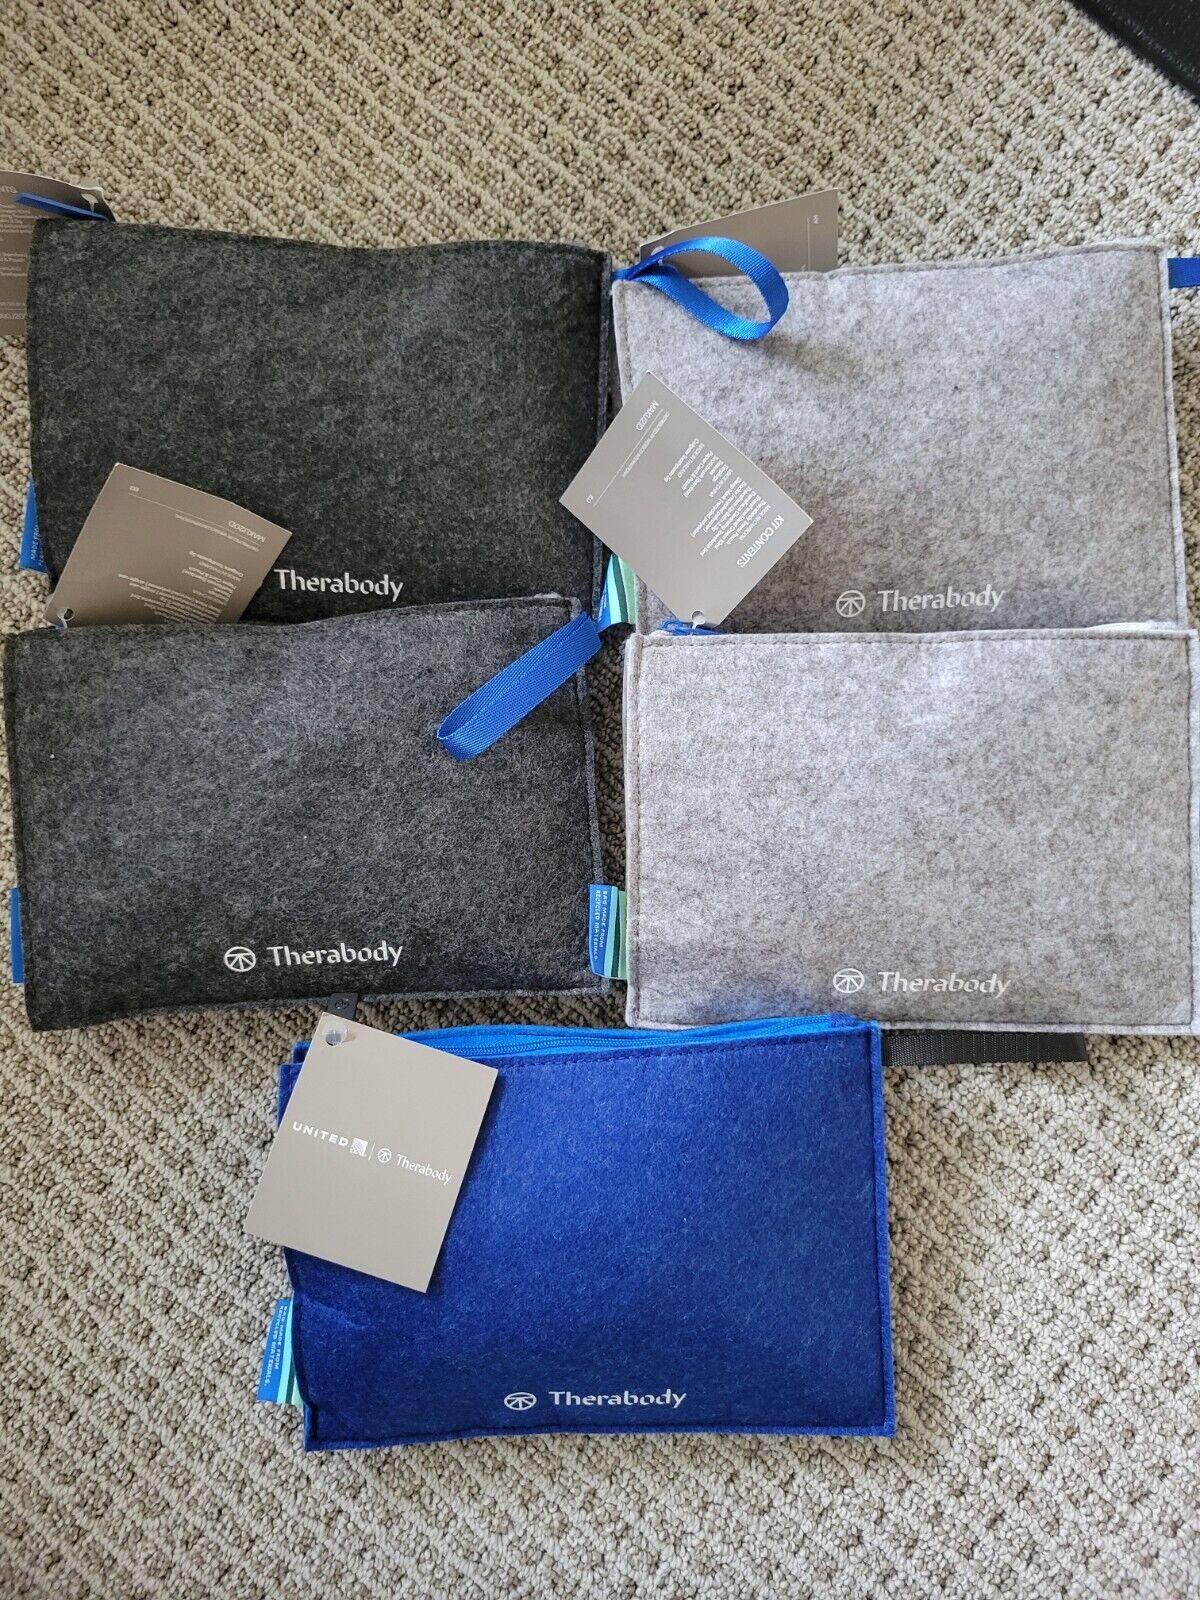 NEW Sealed Lot United Airlines Polaris Therabody Amenity Travel Kit Bag Pouch 5+